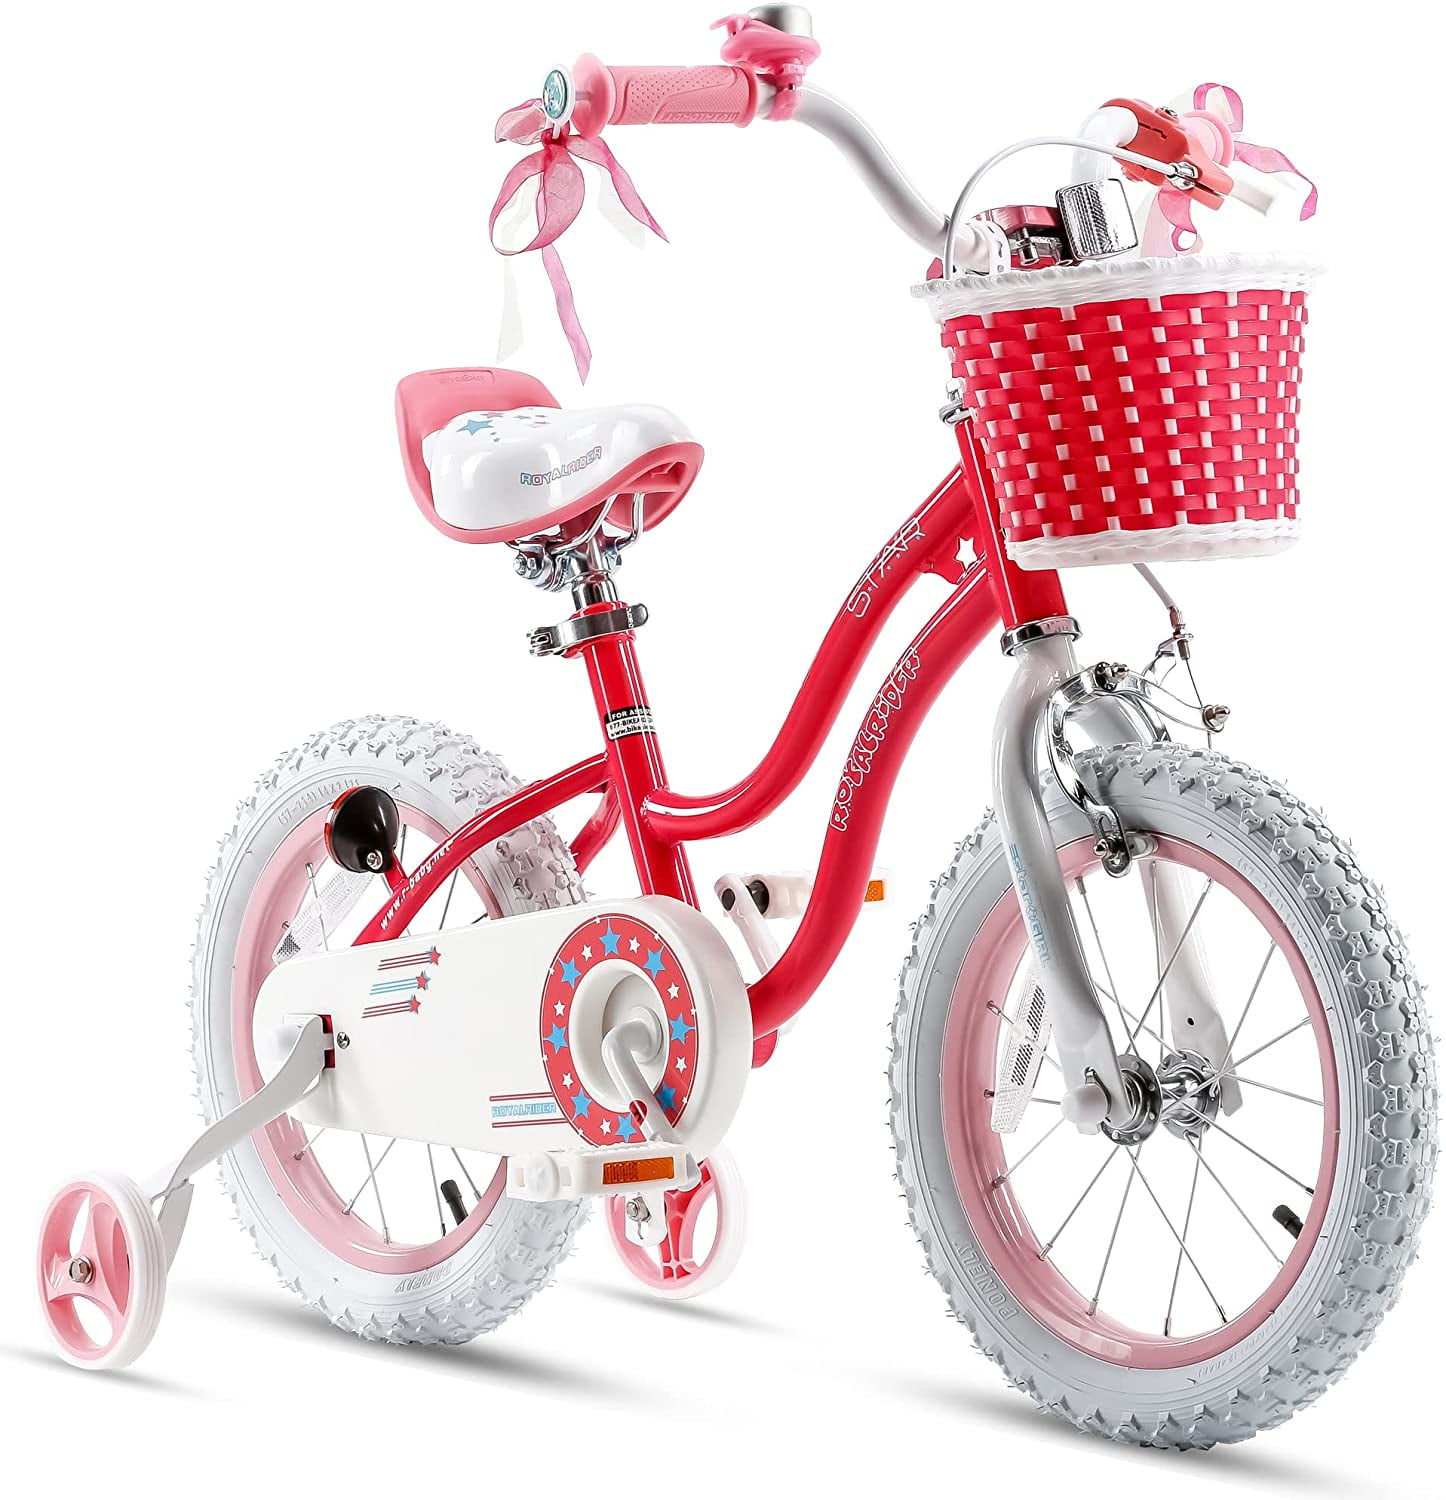 Blue 12 Inch Girls Bike with Training Wheels and Basket Best Gifts for Girls 